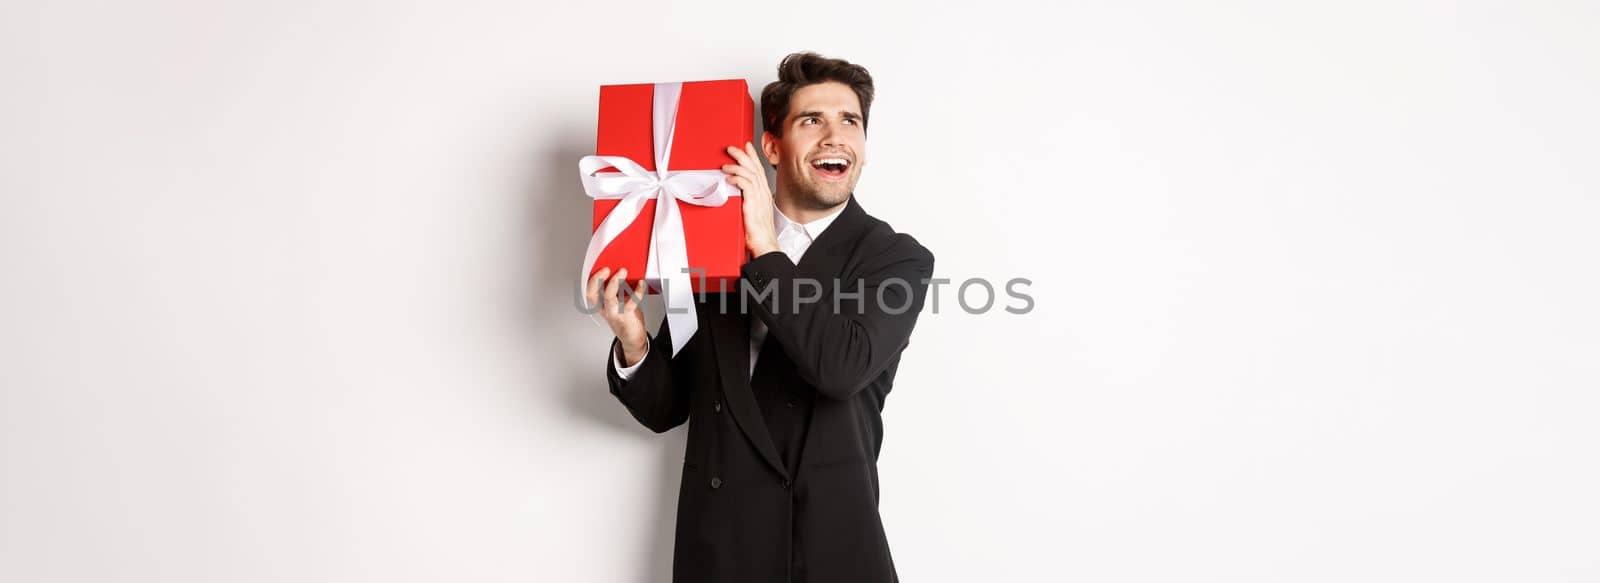 Concept of christmas holidays, celebration and lifestyle. Image of excited man enjoying new year, shaking gift box to guess what inside, standing against white background.